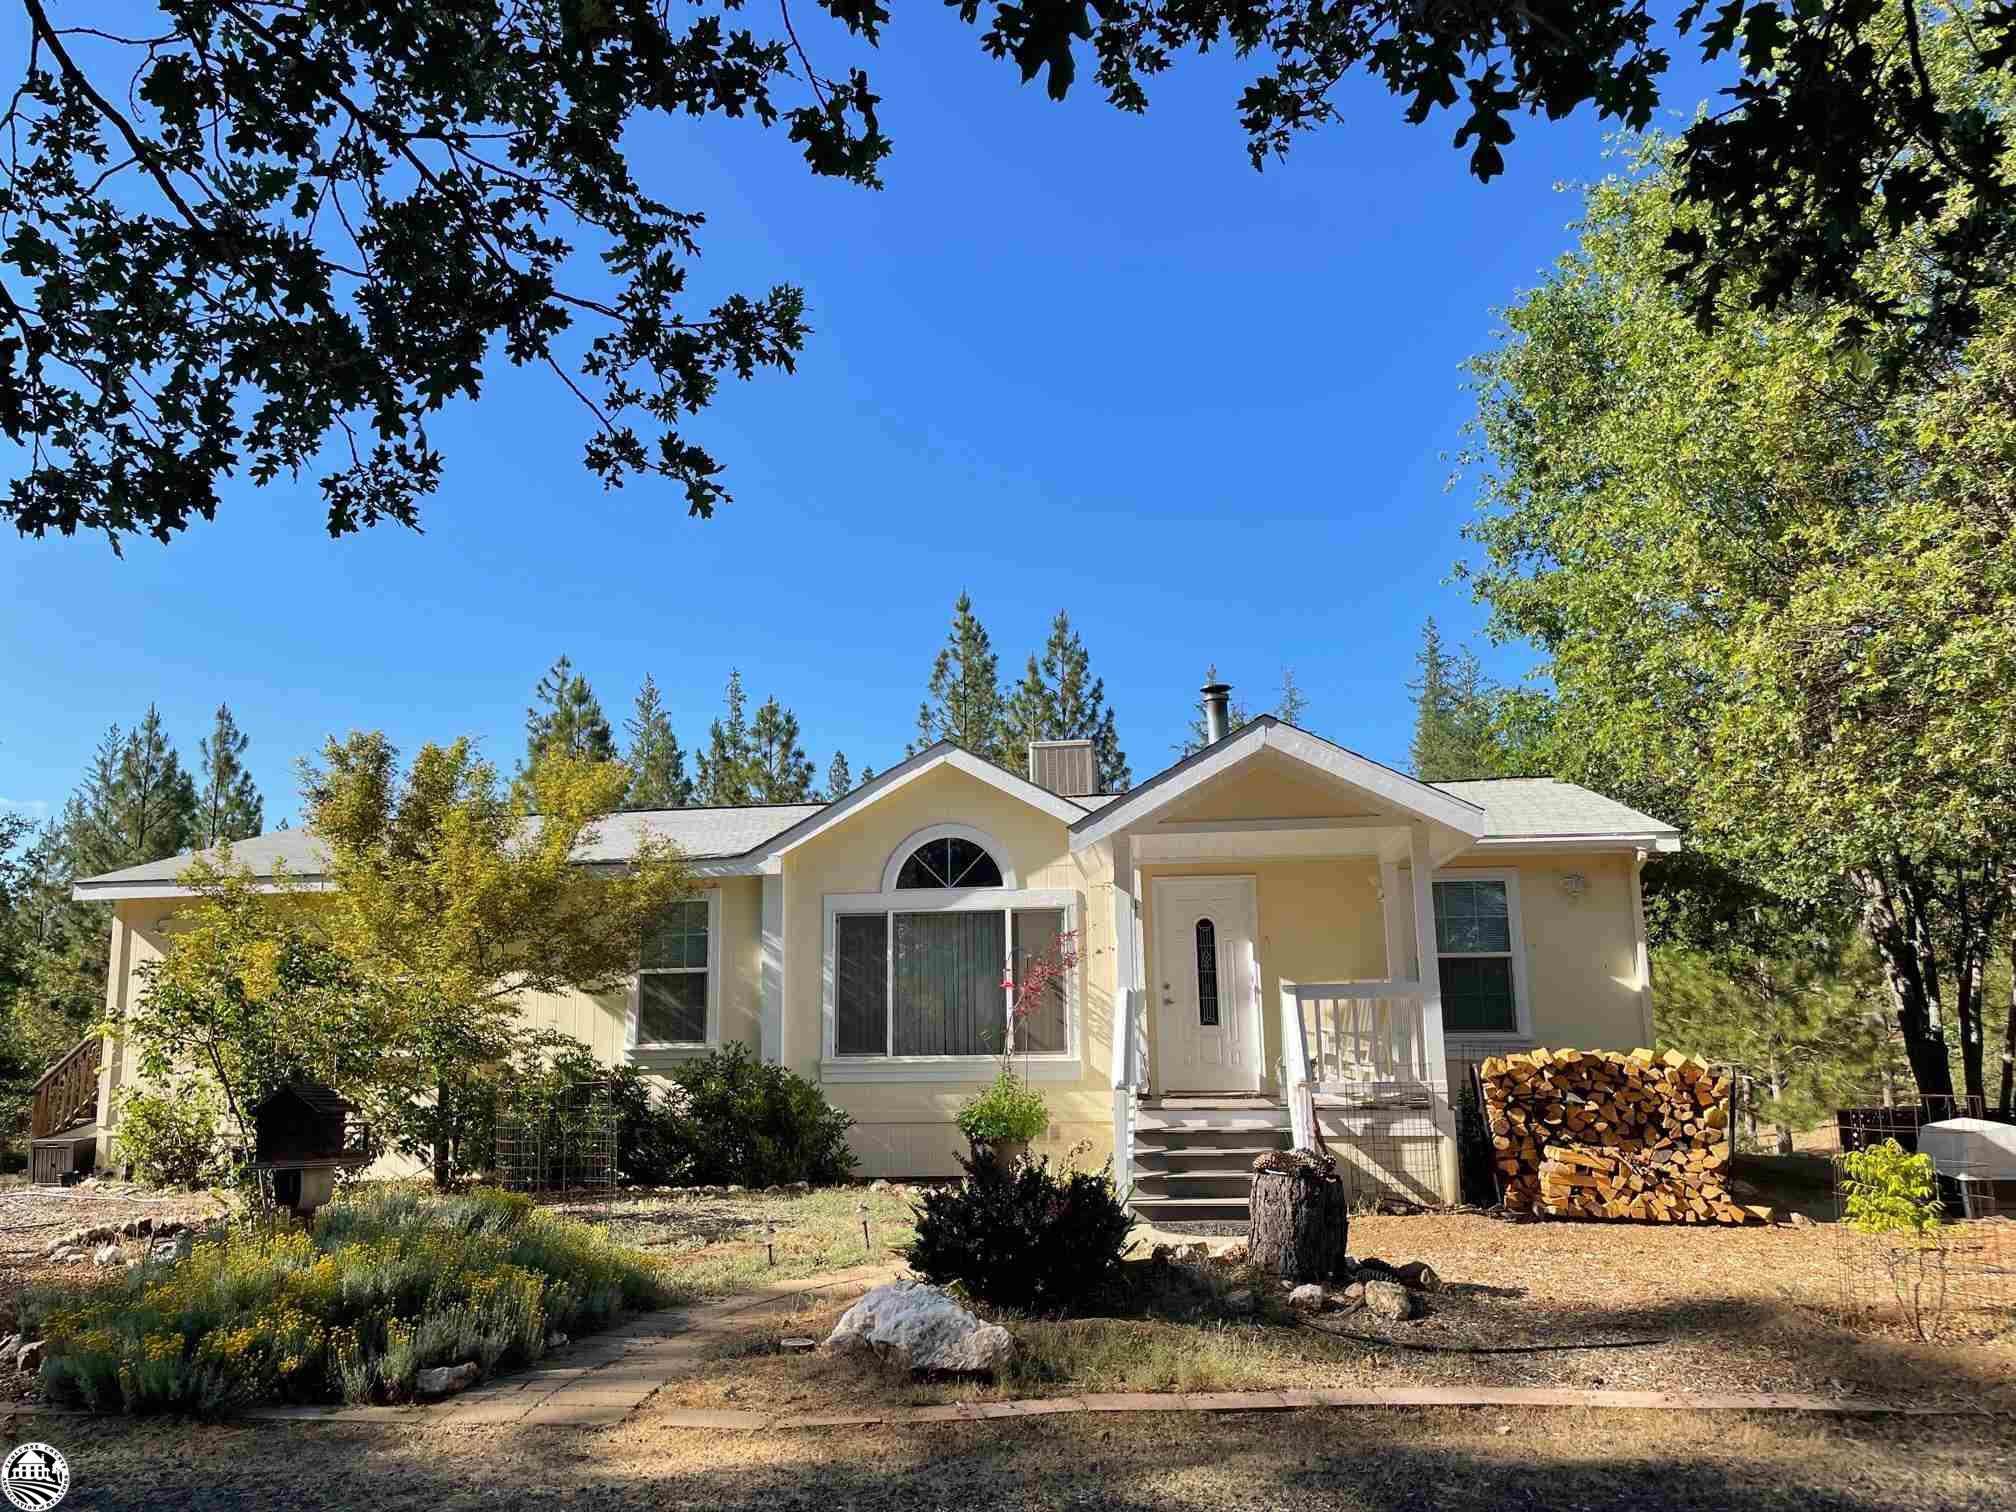 6916B Dogtown Road, Coulterville, CA 95311